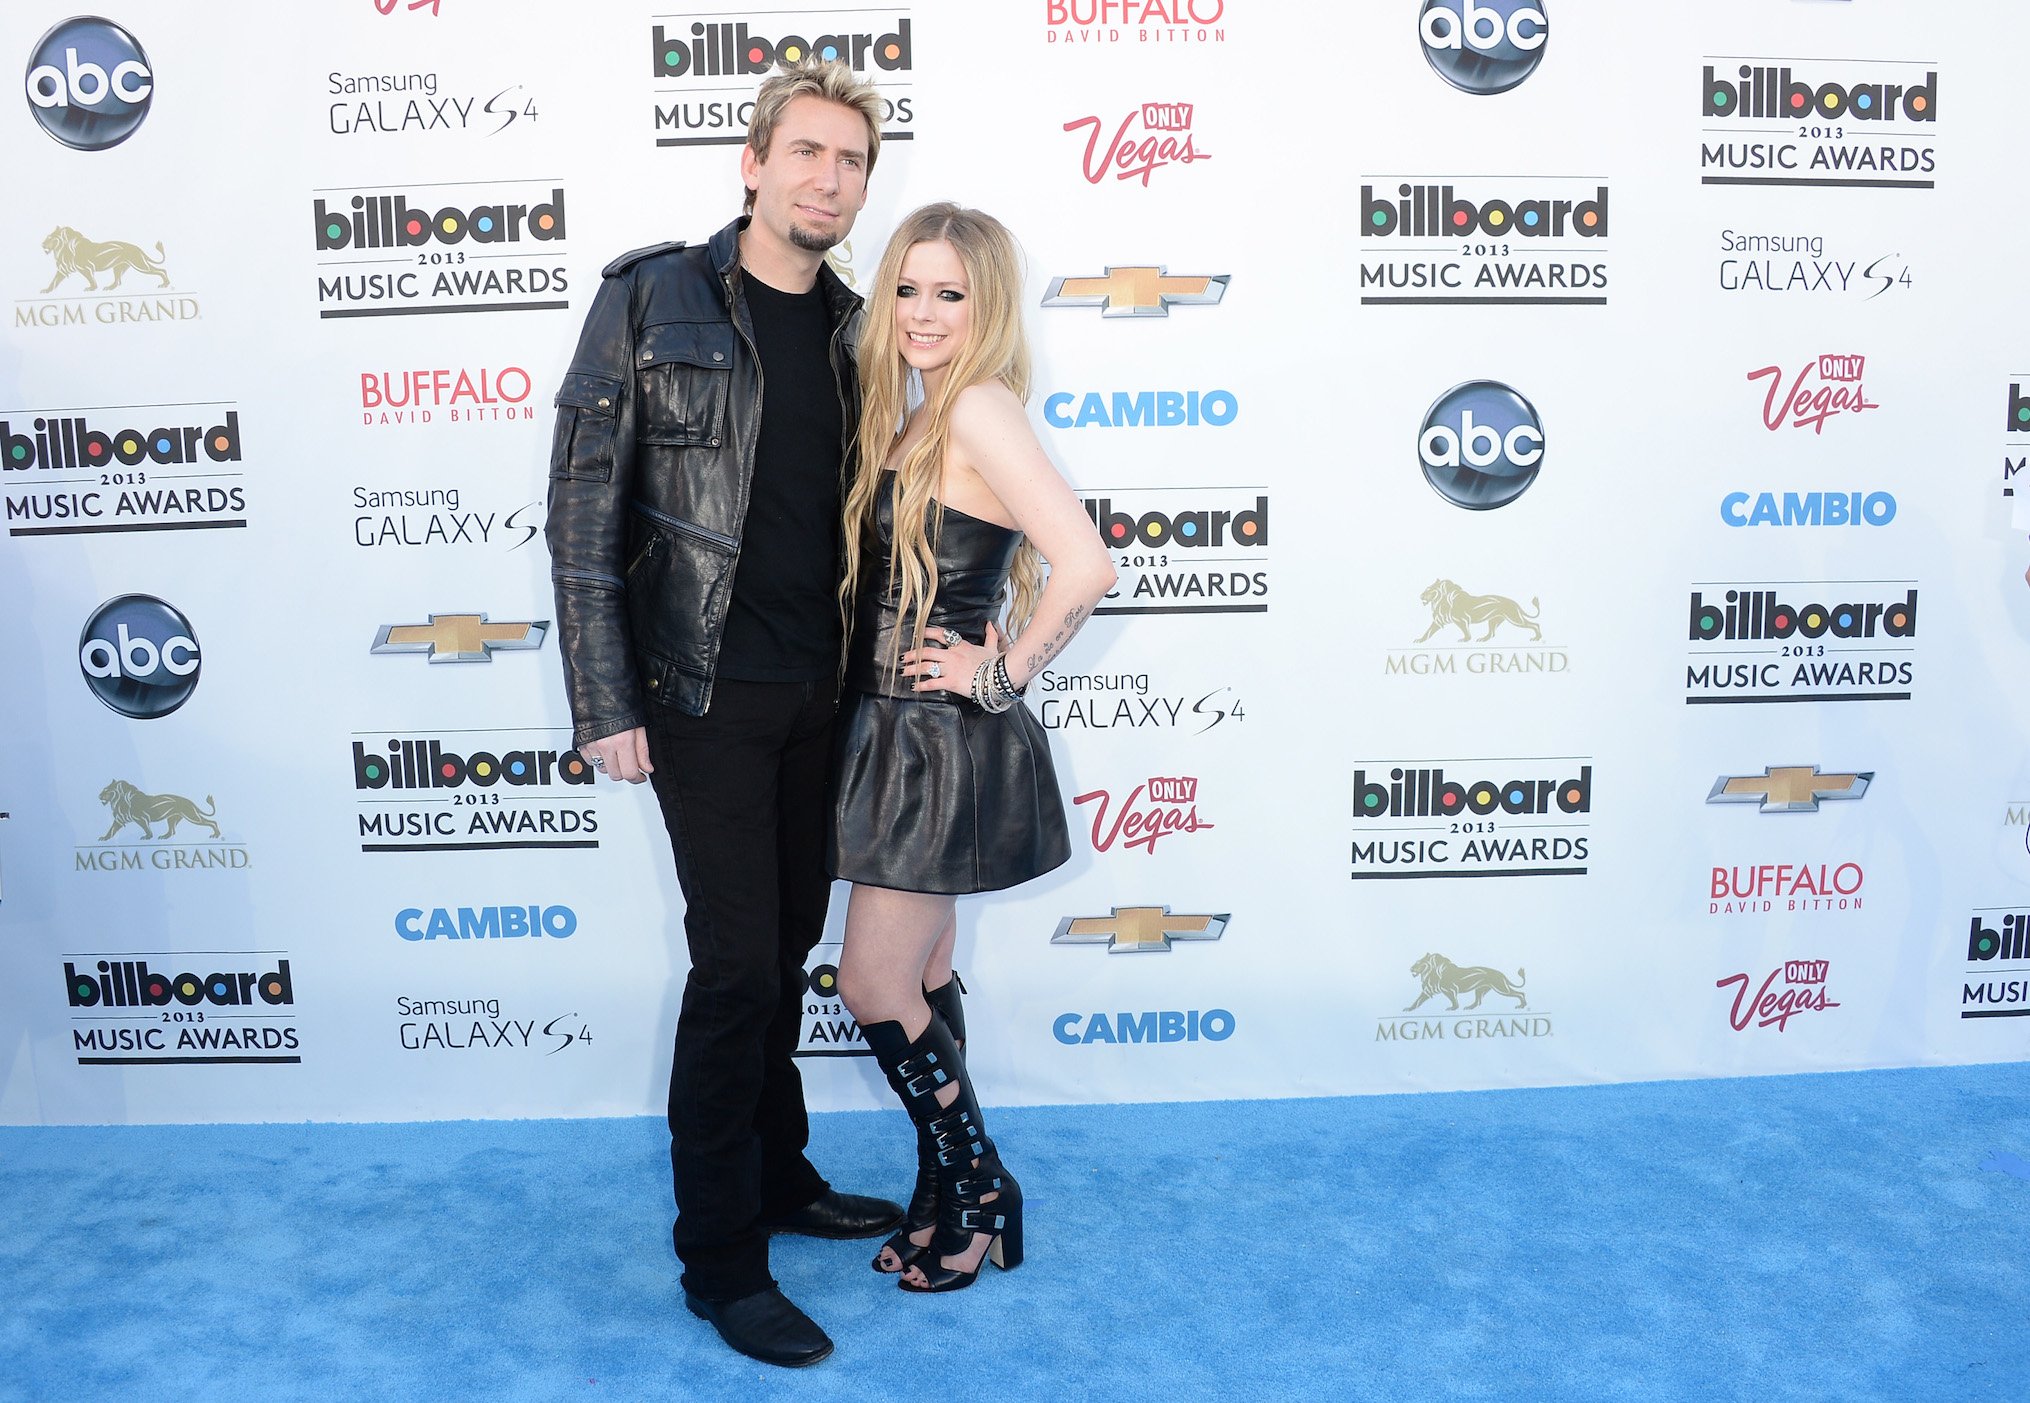 Chad Kroeger of Nickelback and Avril Lavigne